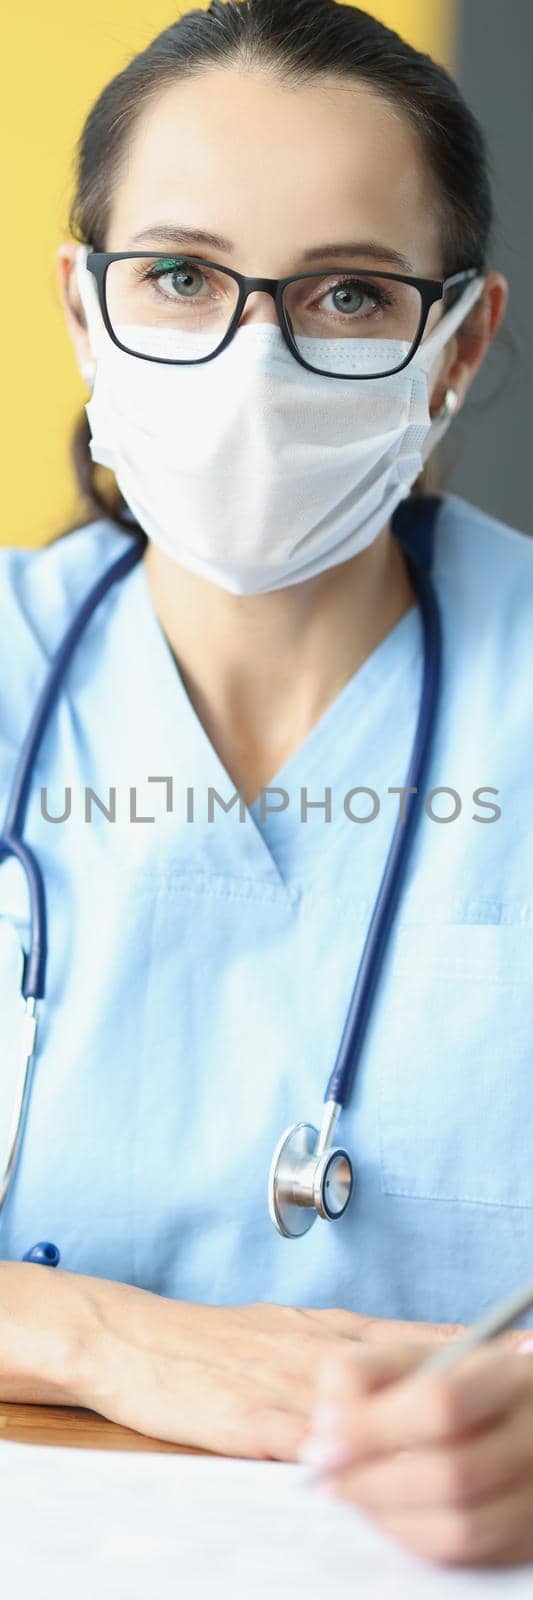 Portrait of qualified doctor ready to listen to patient, appointment in office, woman in uniform and face mask with stethoscope. Hospital, medical worker, clinic, healthcare, checkup concept